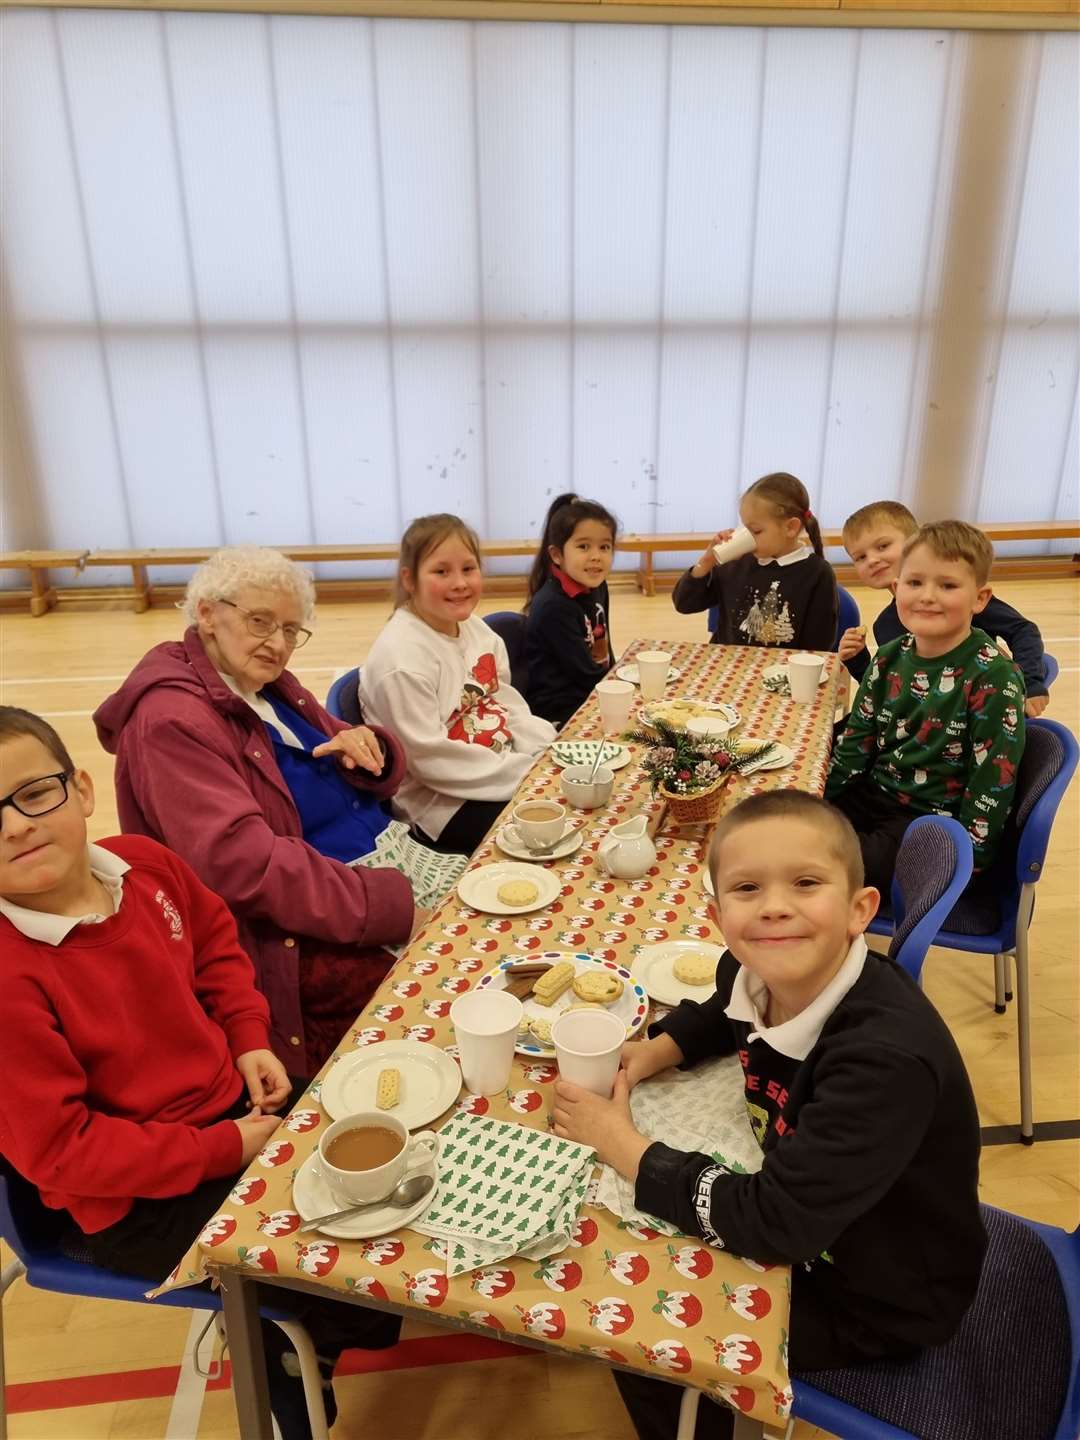 Guests and pupils enjoying afternoon tea together.